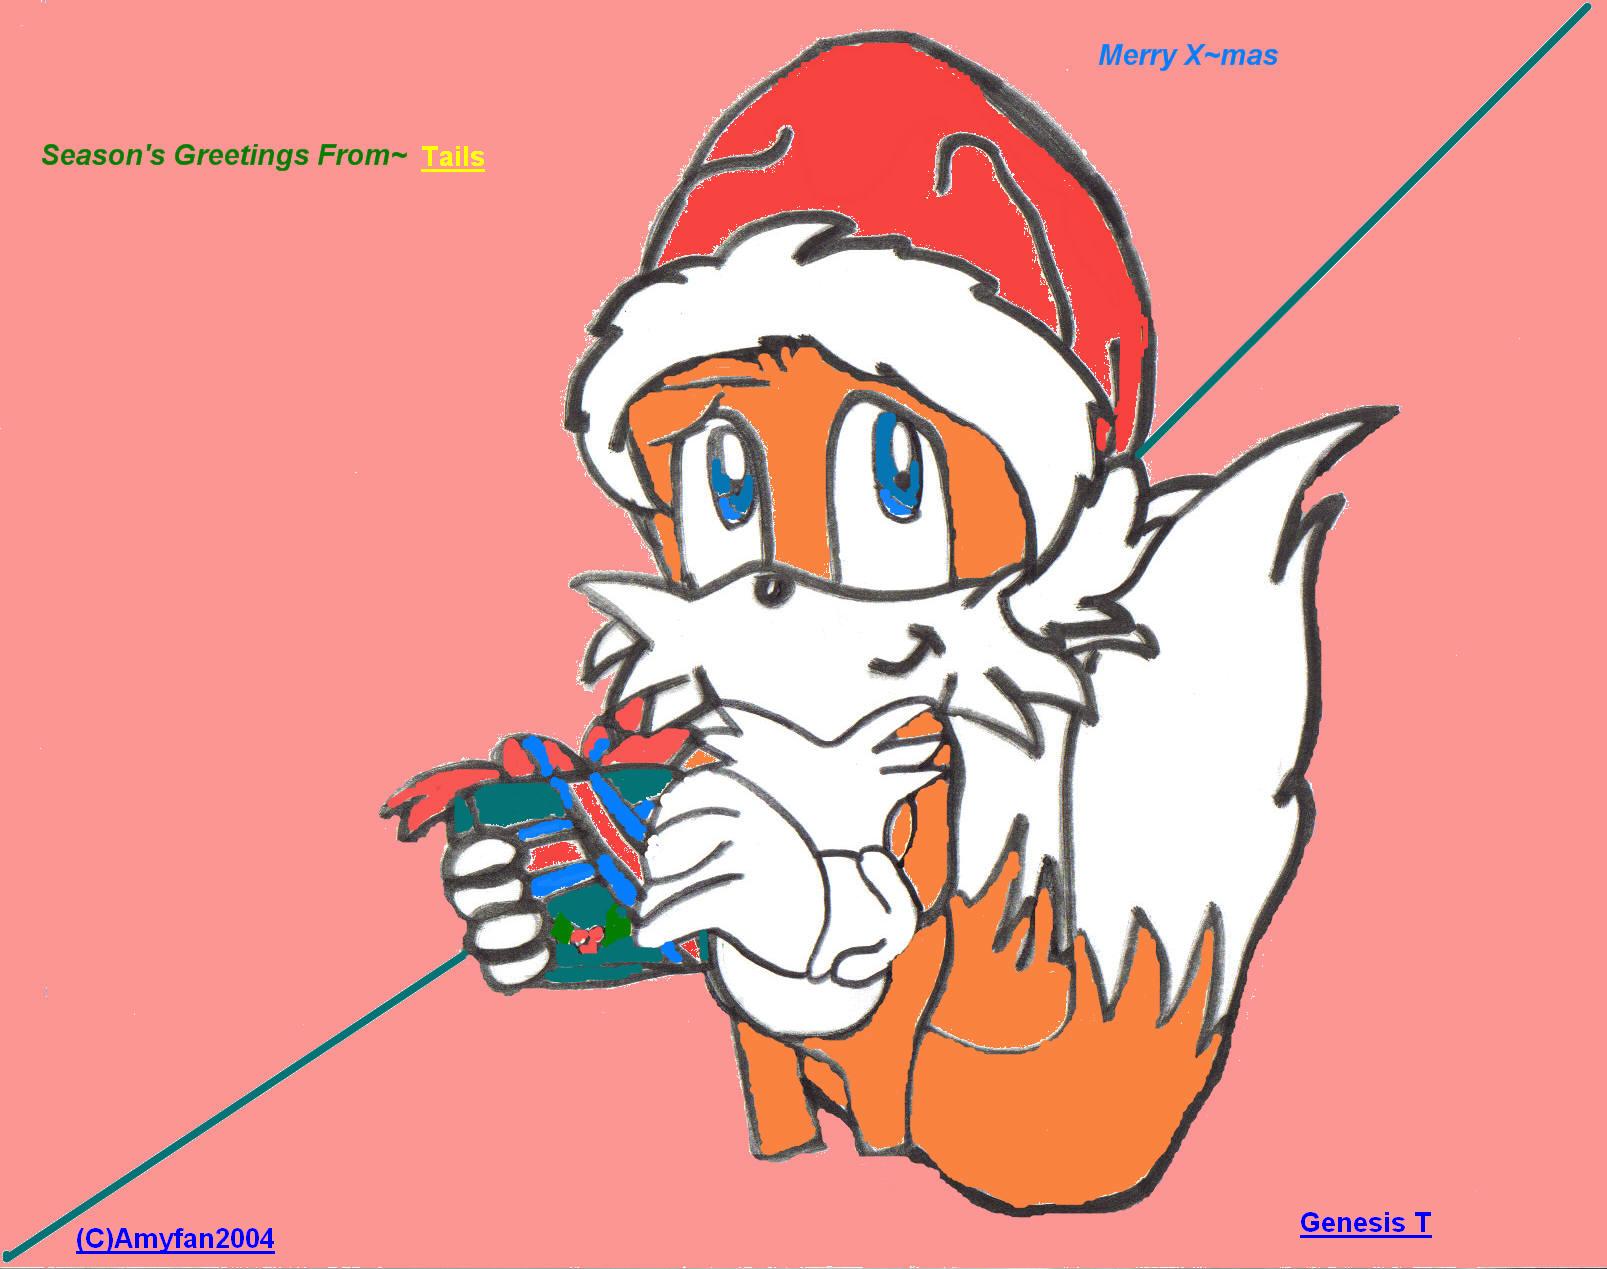 A merry Christmas Tails by Amyfan2004